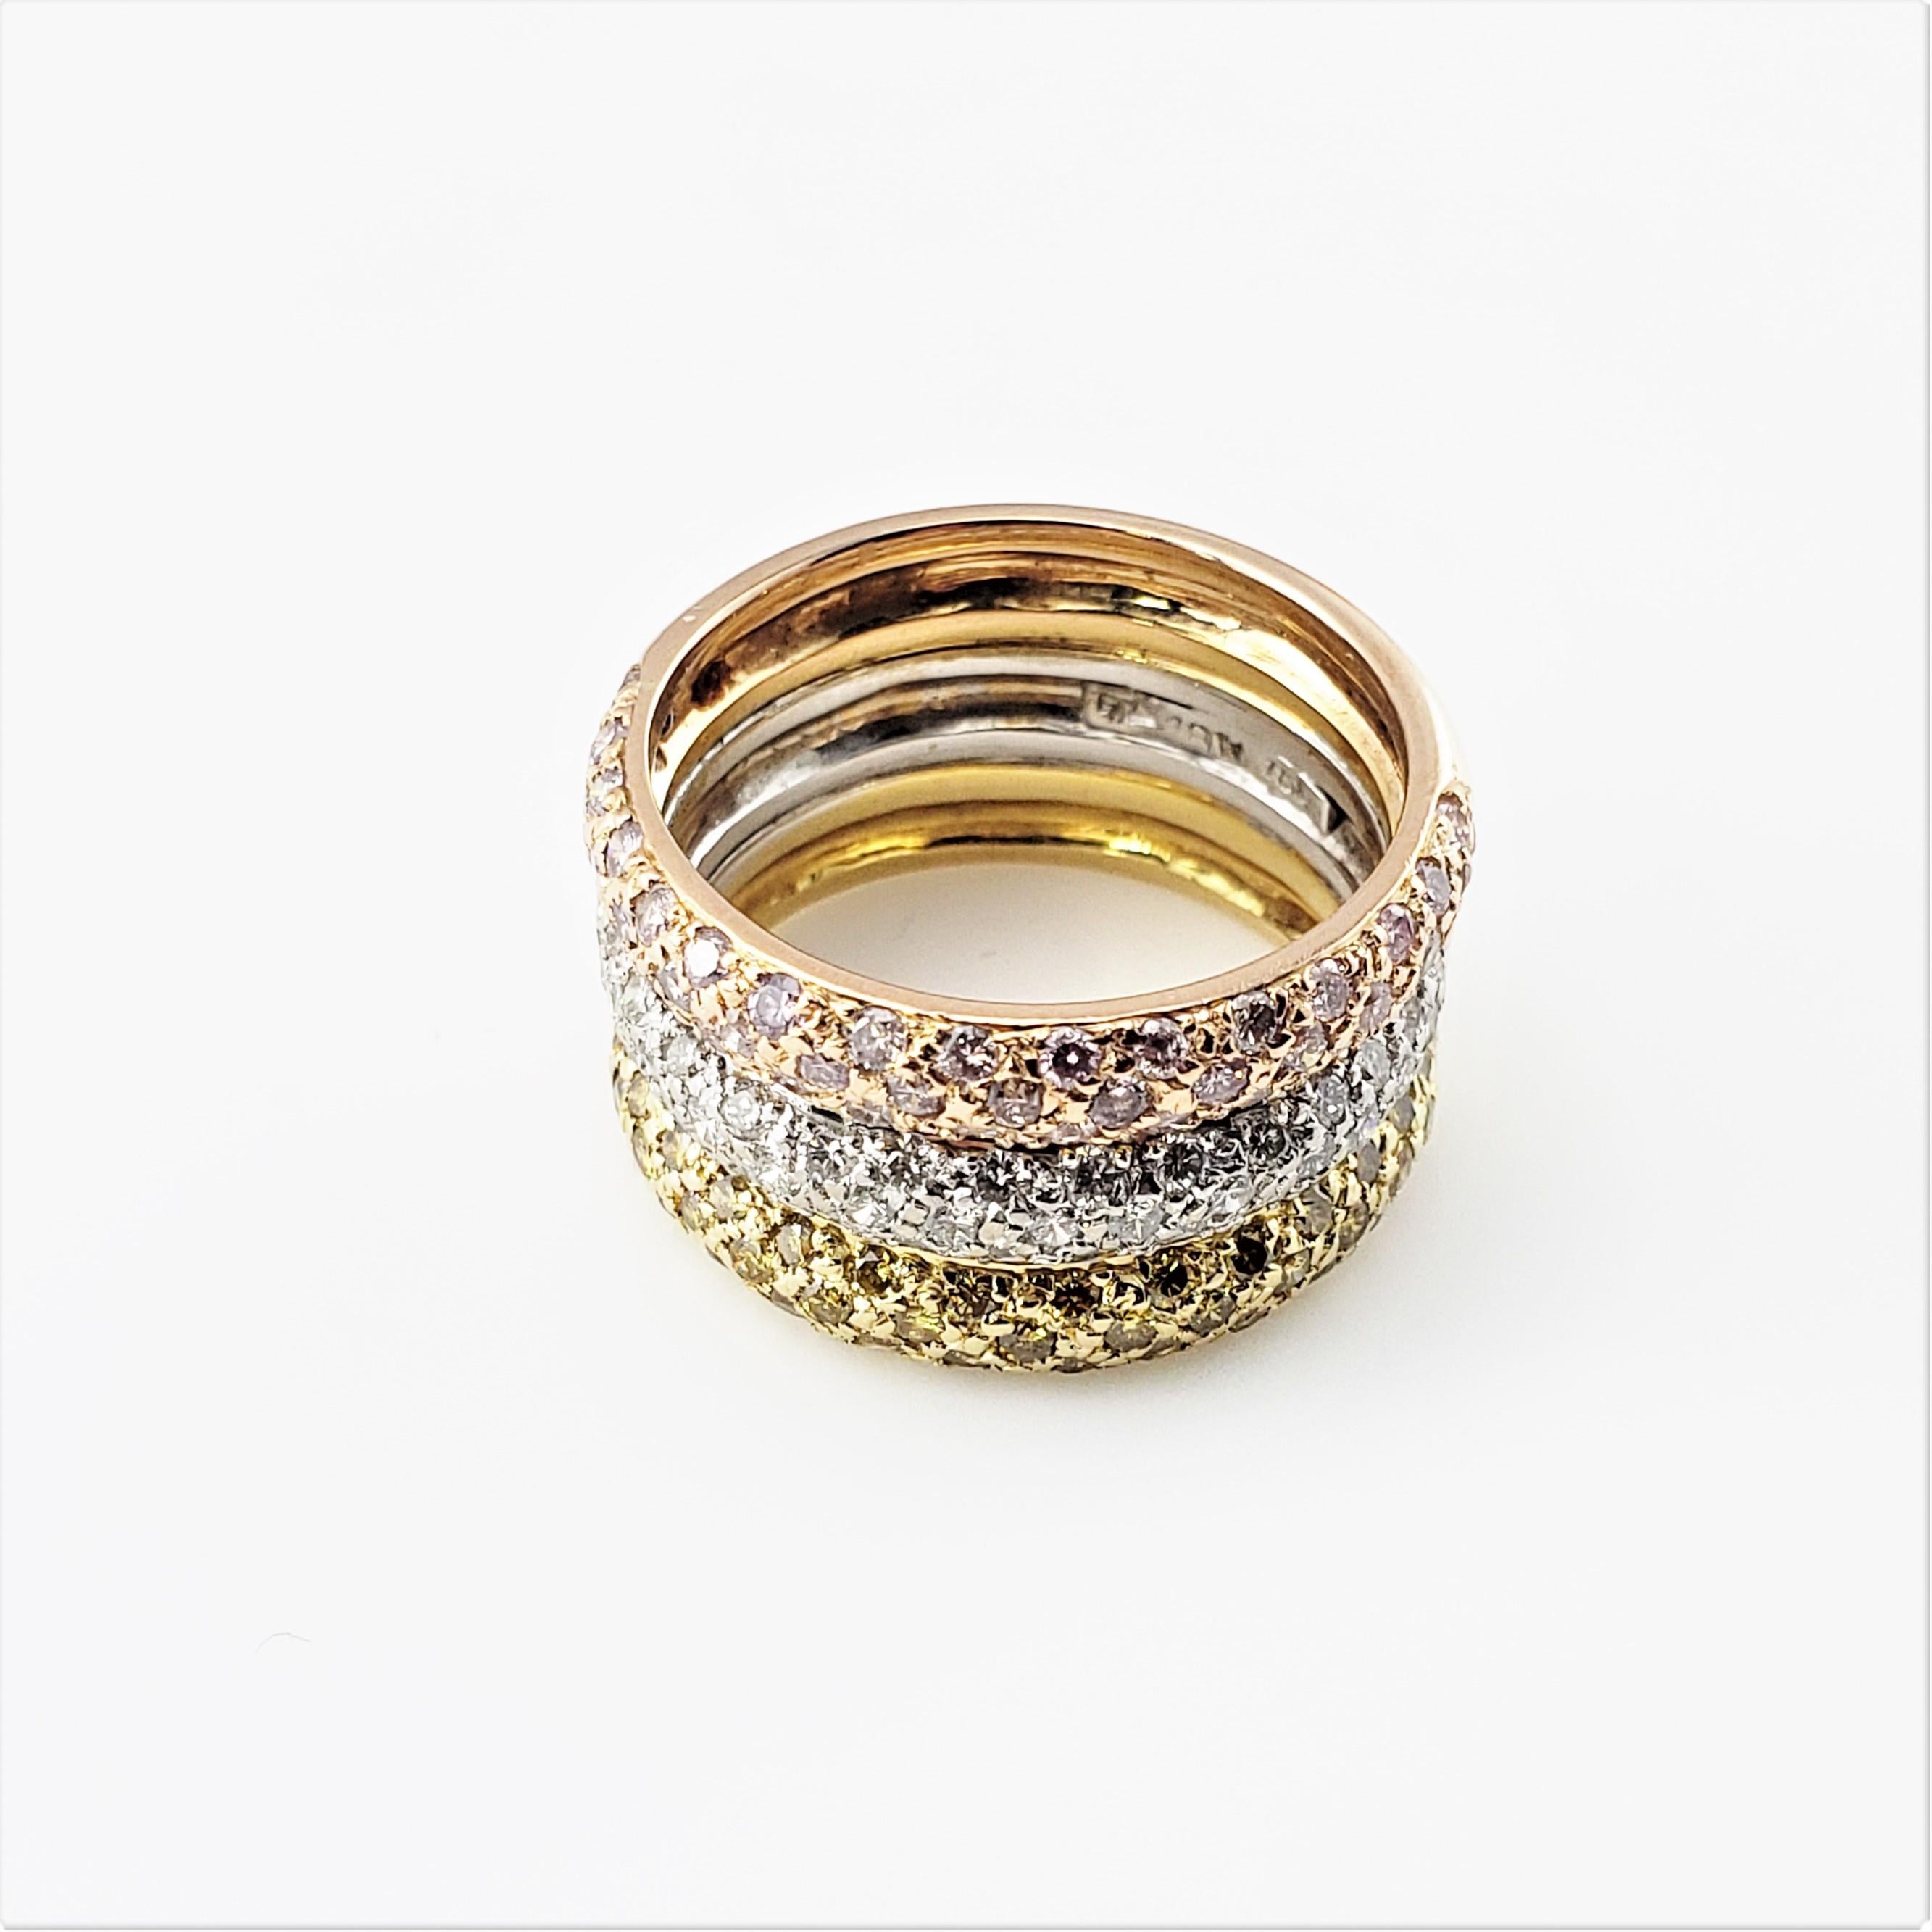 18 Karat Yellow, White and Rose Gold and Diamond Triple Band Ring Size 6.5-

This stunning ring features three fixed bands in rose, white and yellow 18K gold decorated with 147 round brilliant cut diamonds. Diamonds in rose gold band are color